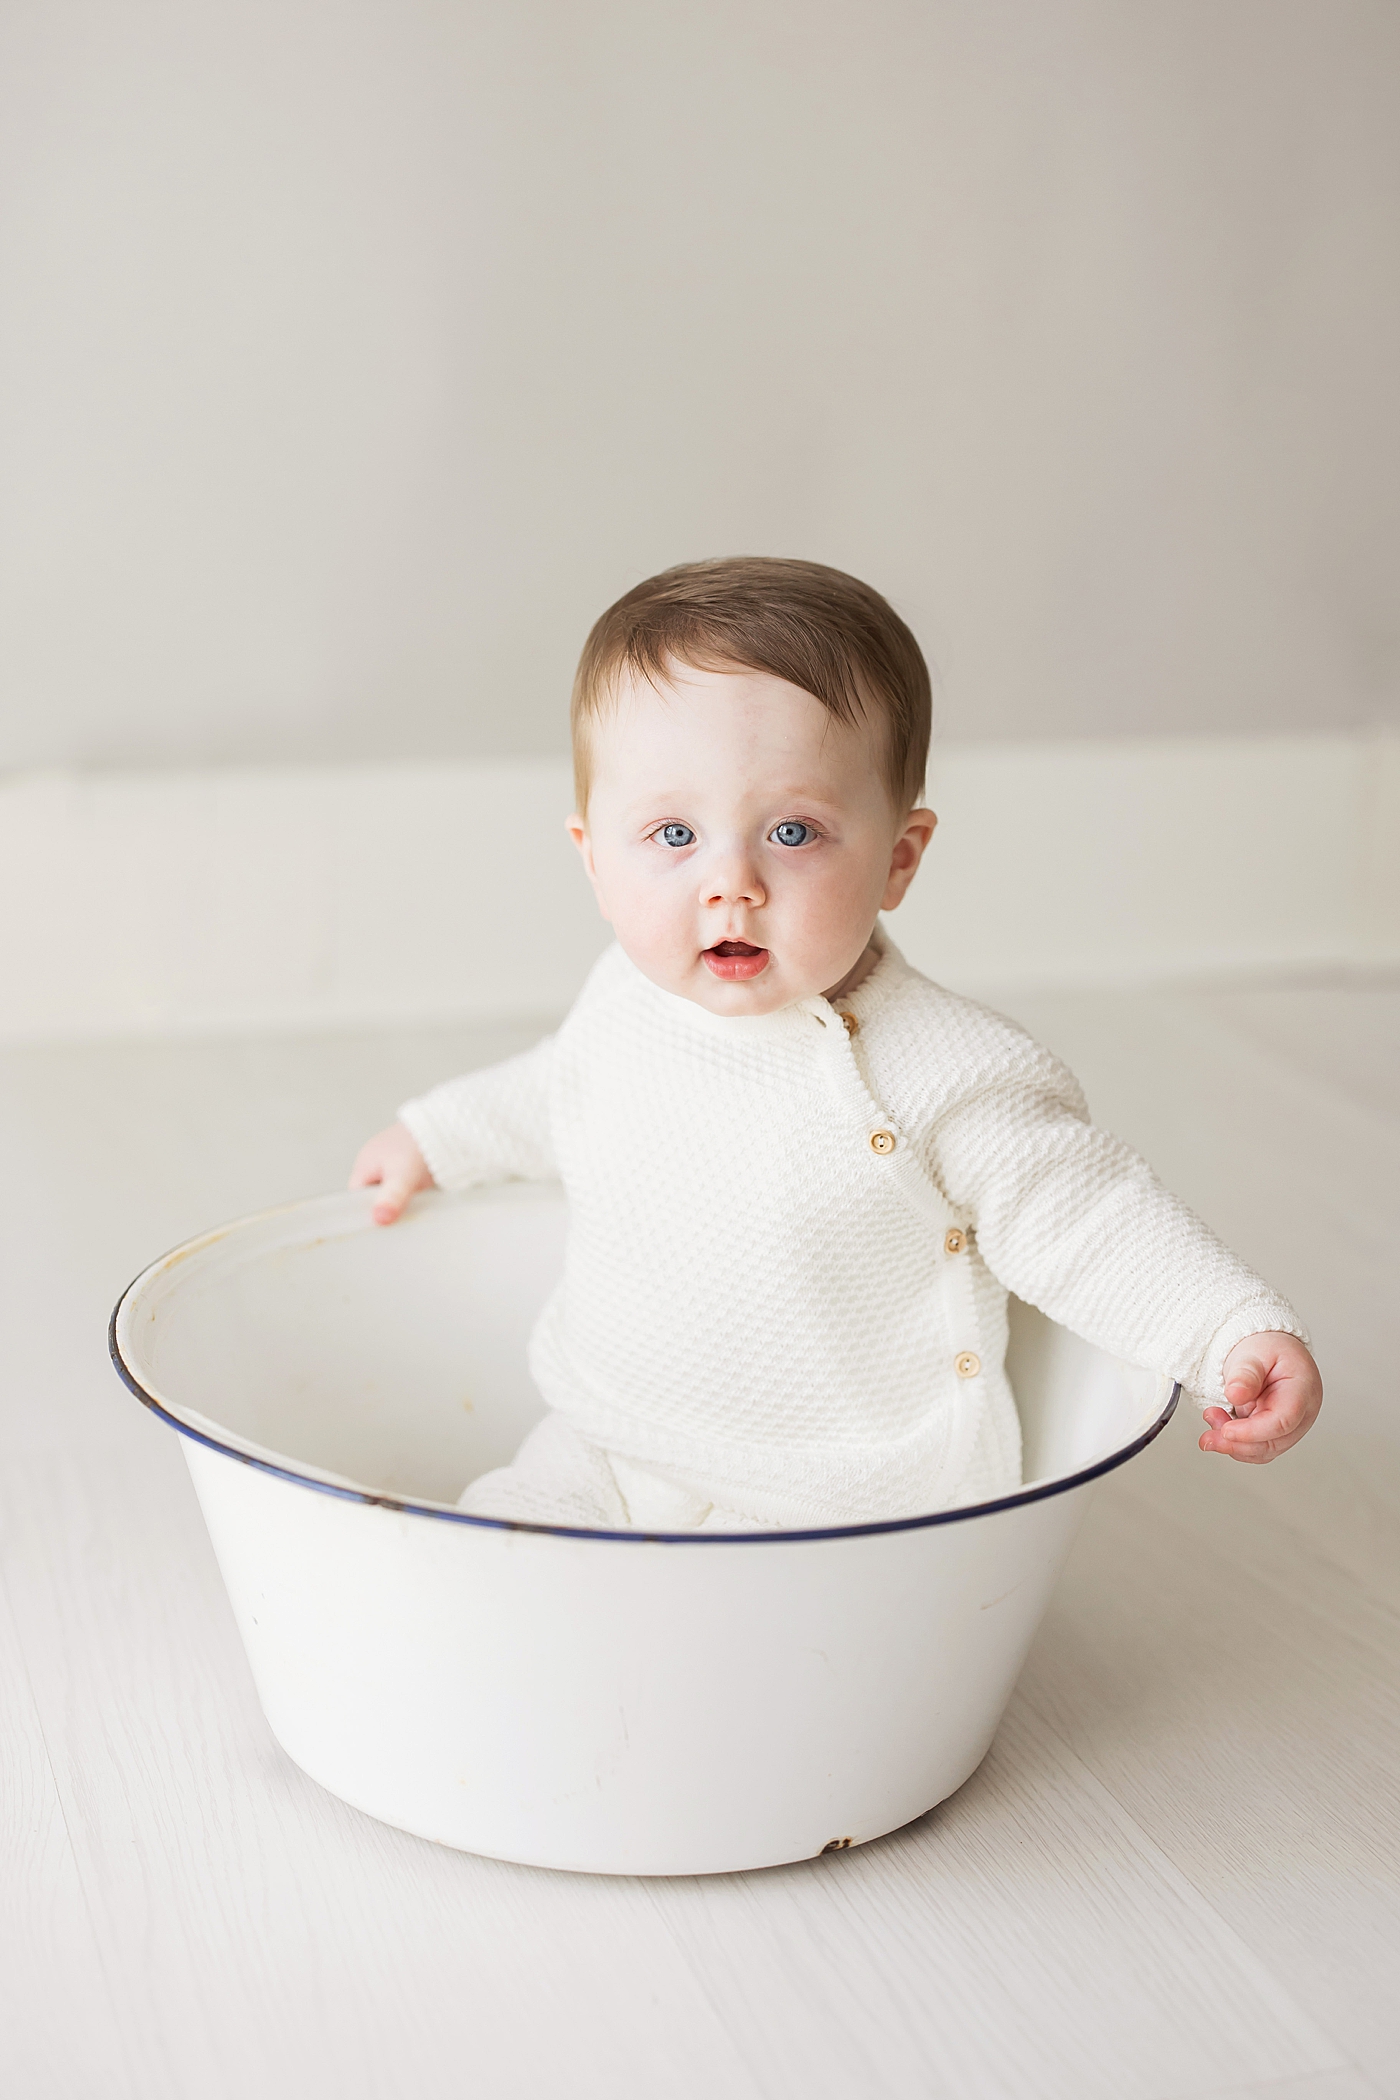 Baby boy wearing knit outfit sitting in big bowl. Photo by Fresh Light Photography